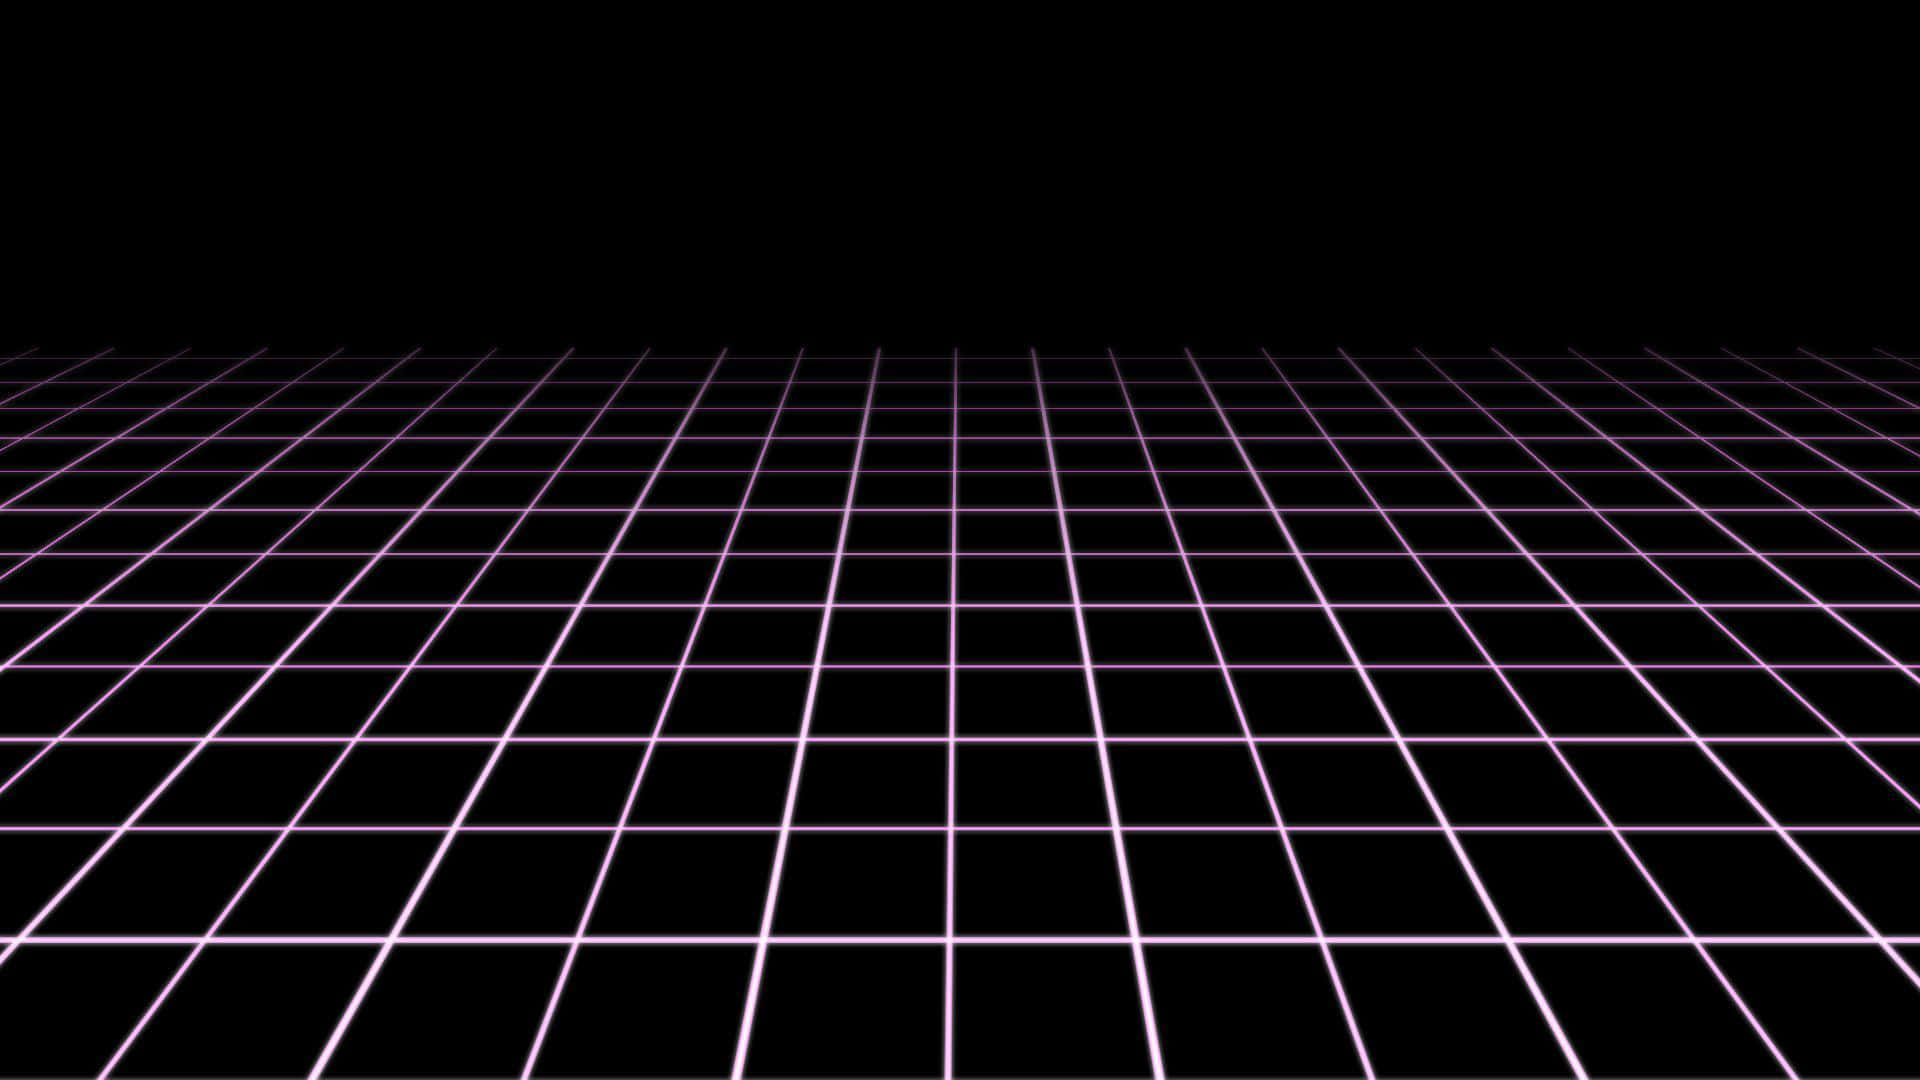 Abstract Pink Grid Design Wallpaper